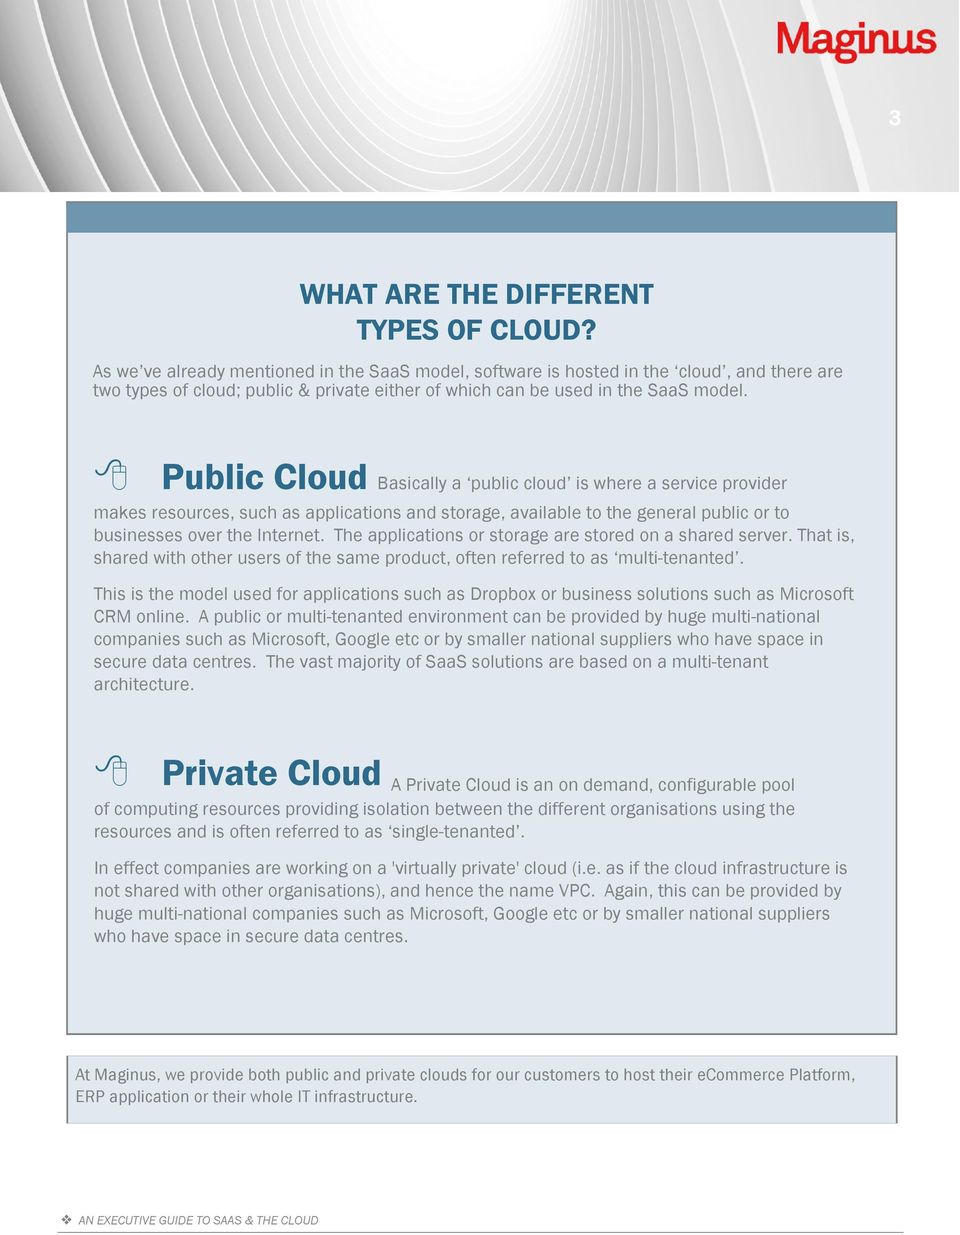 Public Cloud Basically a public cloud is where a service provider makes resources, such as applications and storage, available to the general public or to businesses over the Internet.